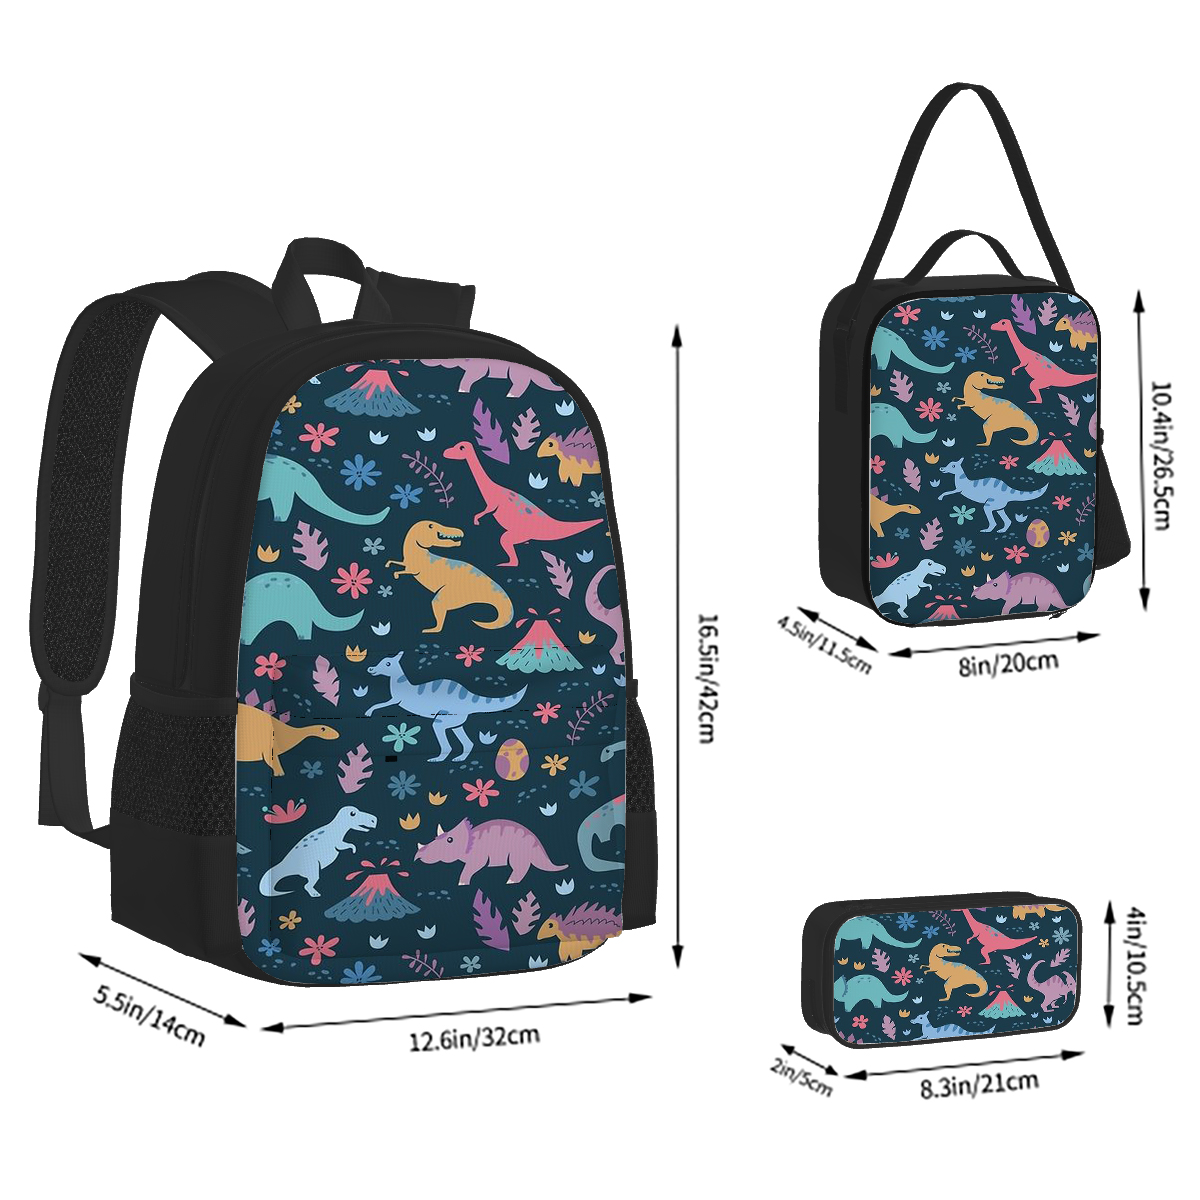 Makeup Personalized Events Print on Demand Backpacks